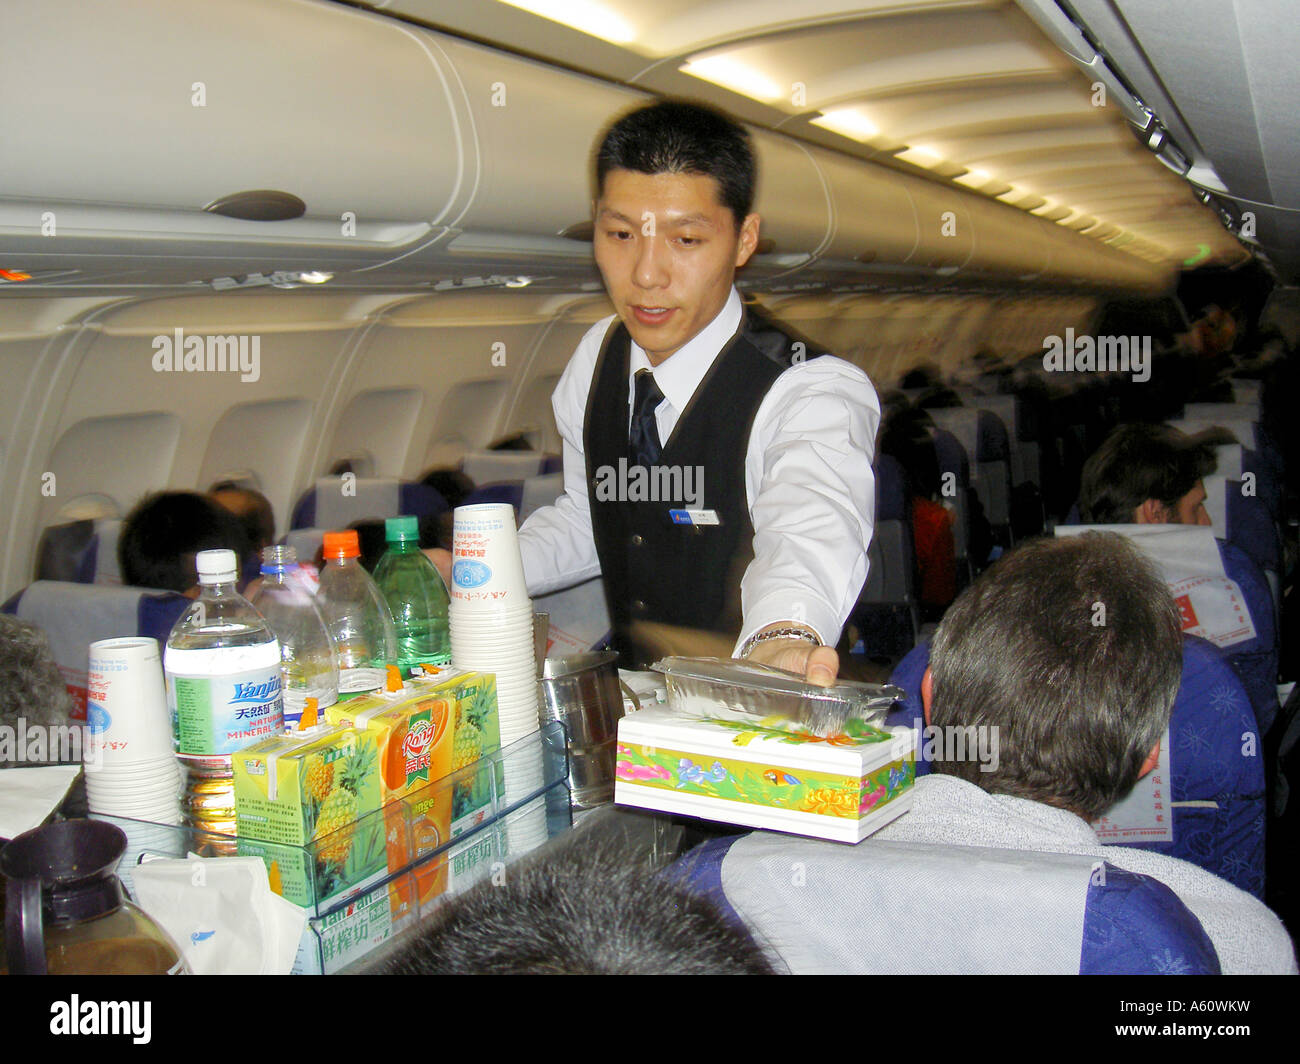 Flight attendant on Hainan Airlines flight aircraft serving meal package lunch dinner to passenger from aisle trolley, China Stock Photo